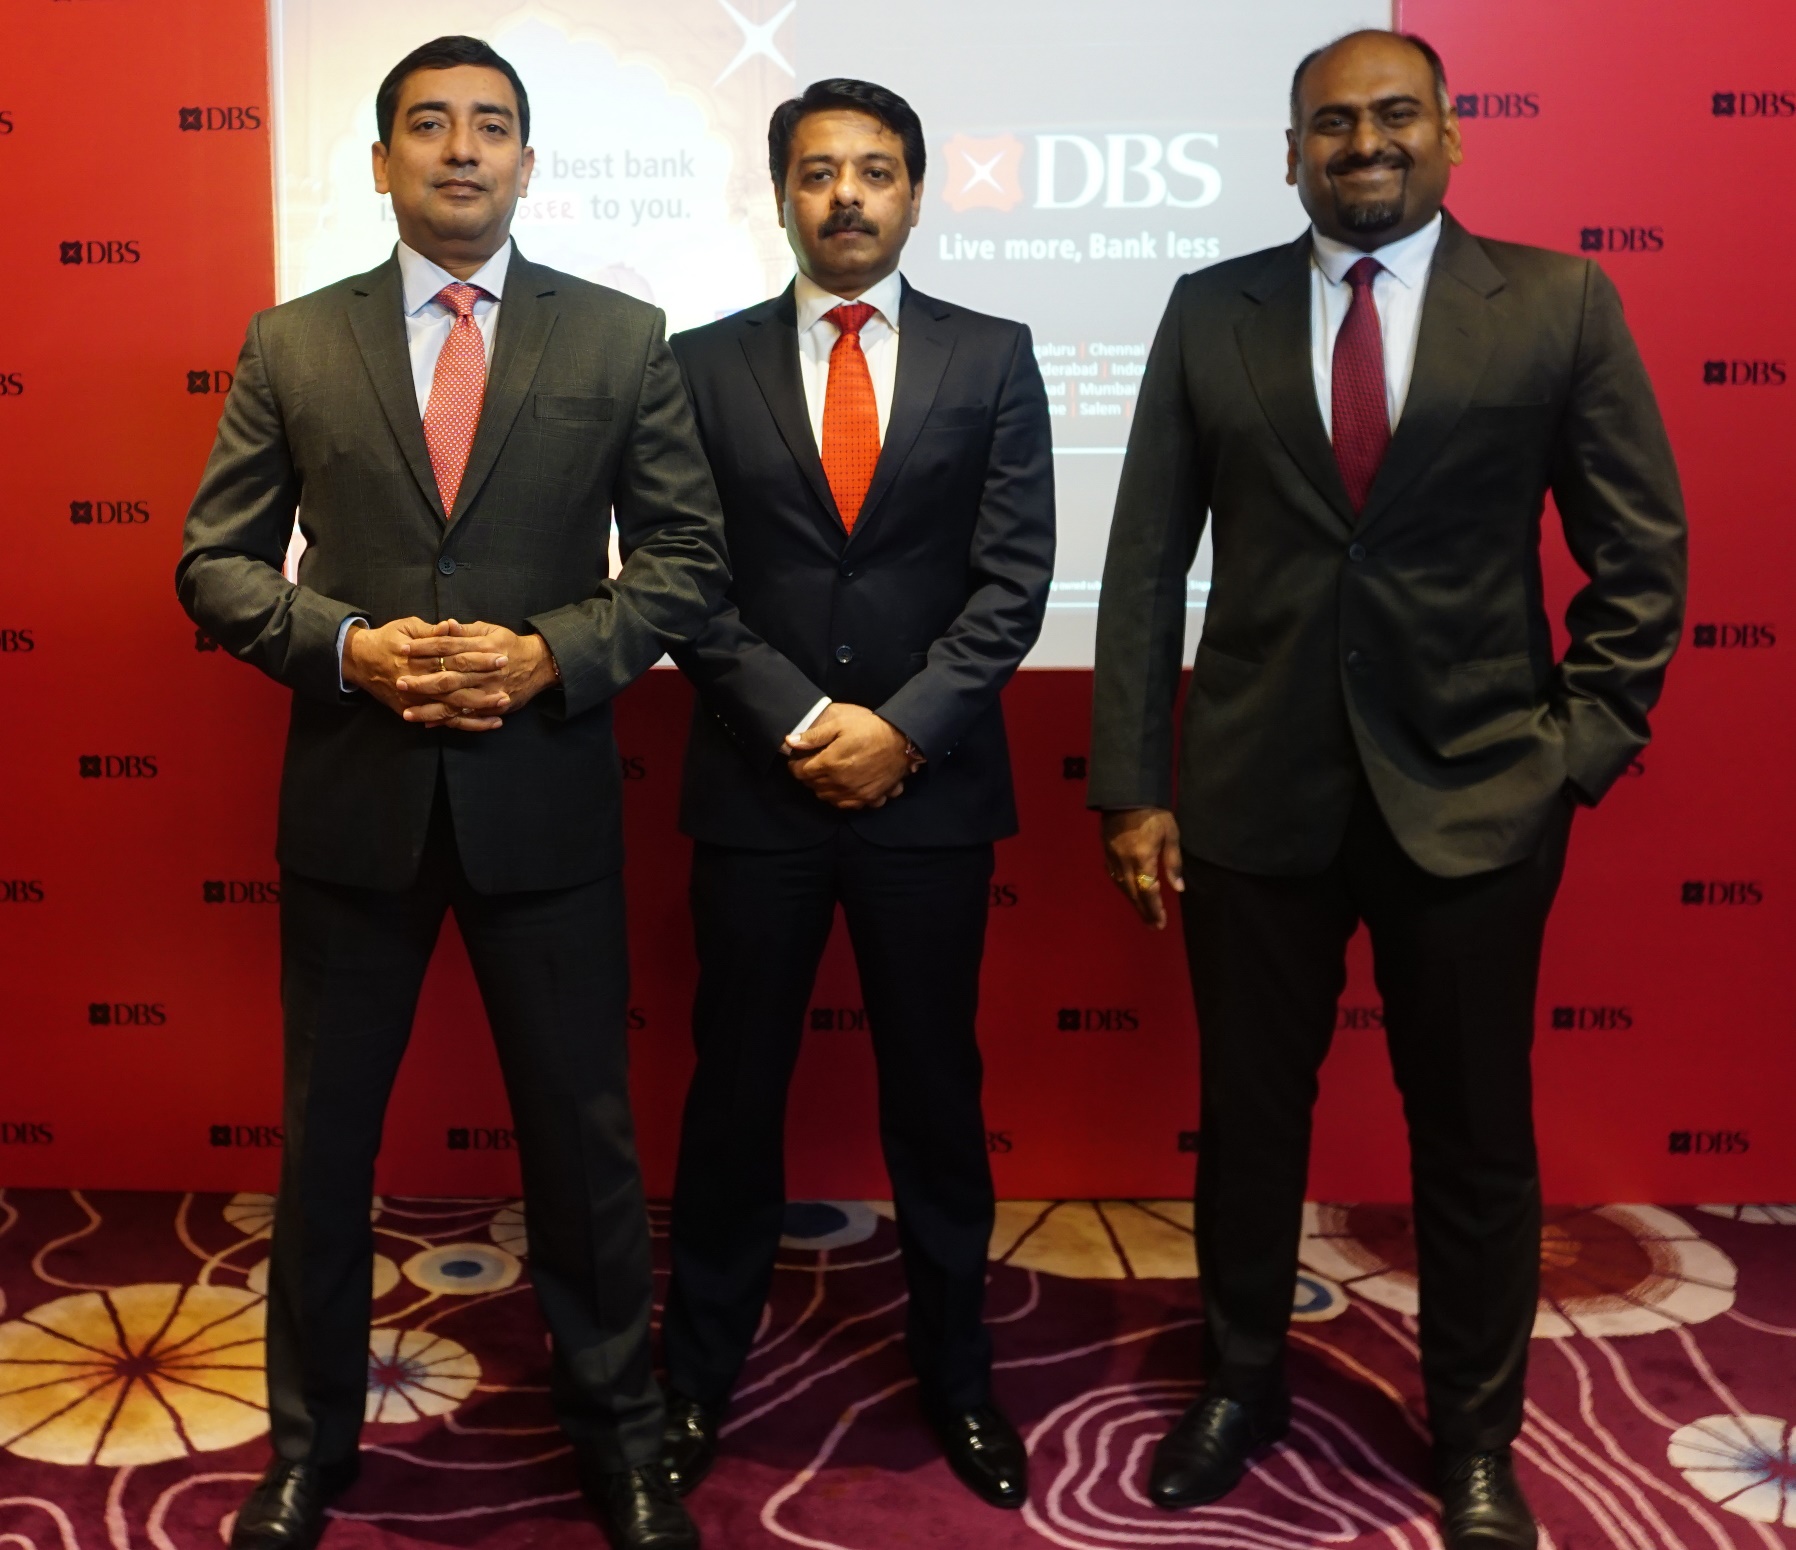 dbs-bank-inaugurates-its-first-branch-in-jaipur